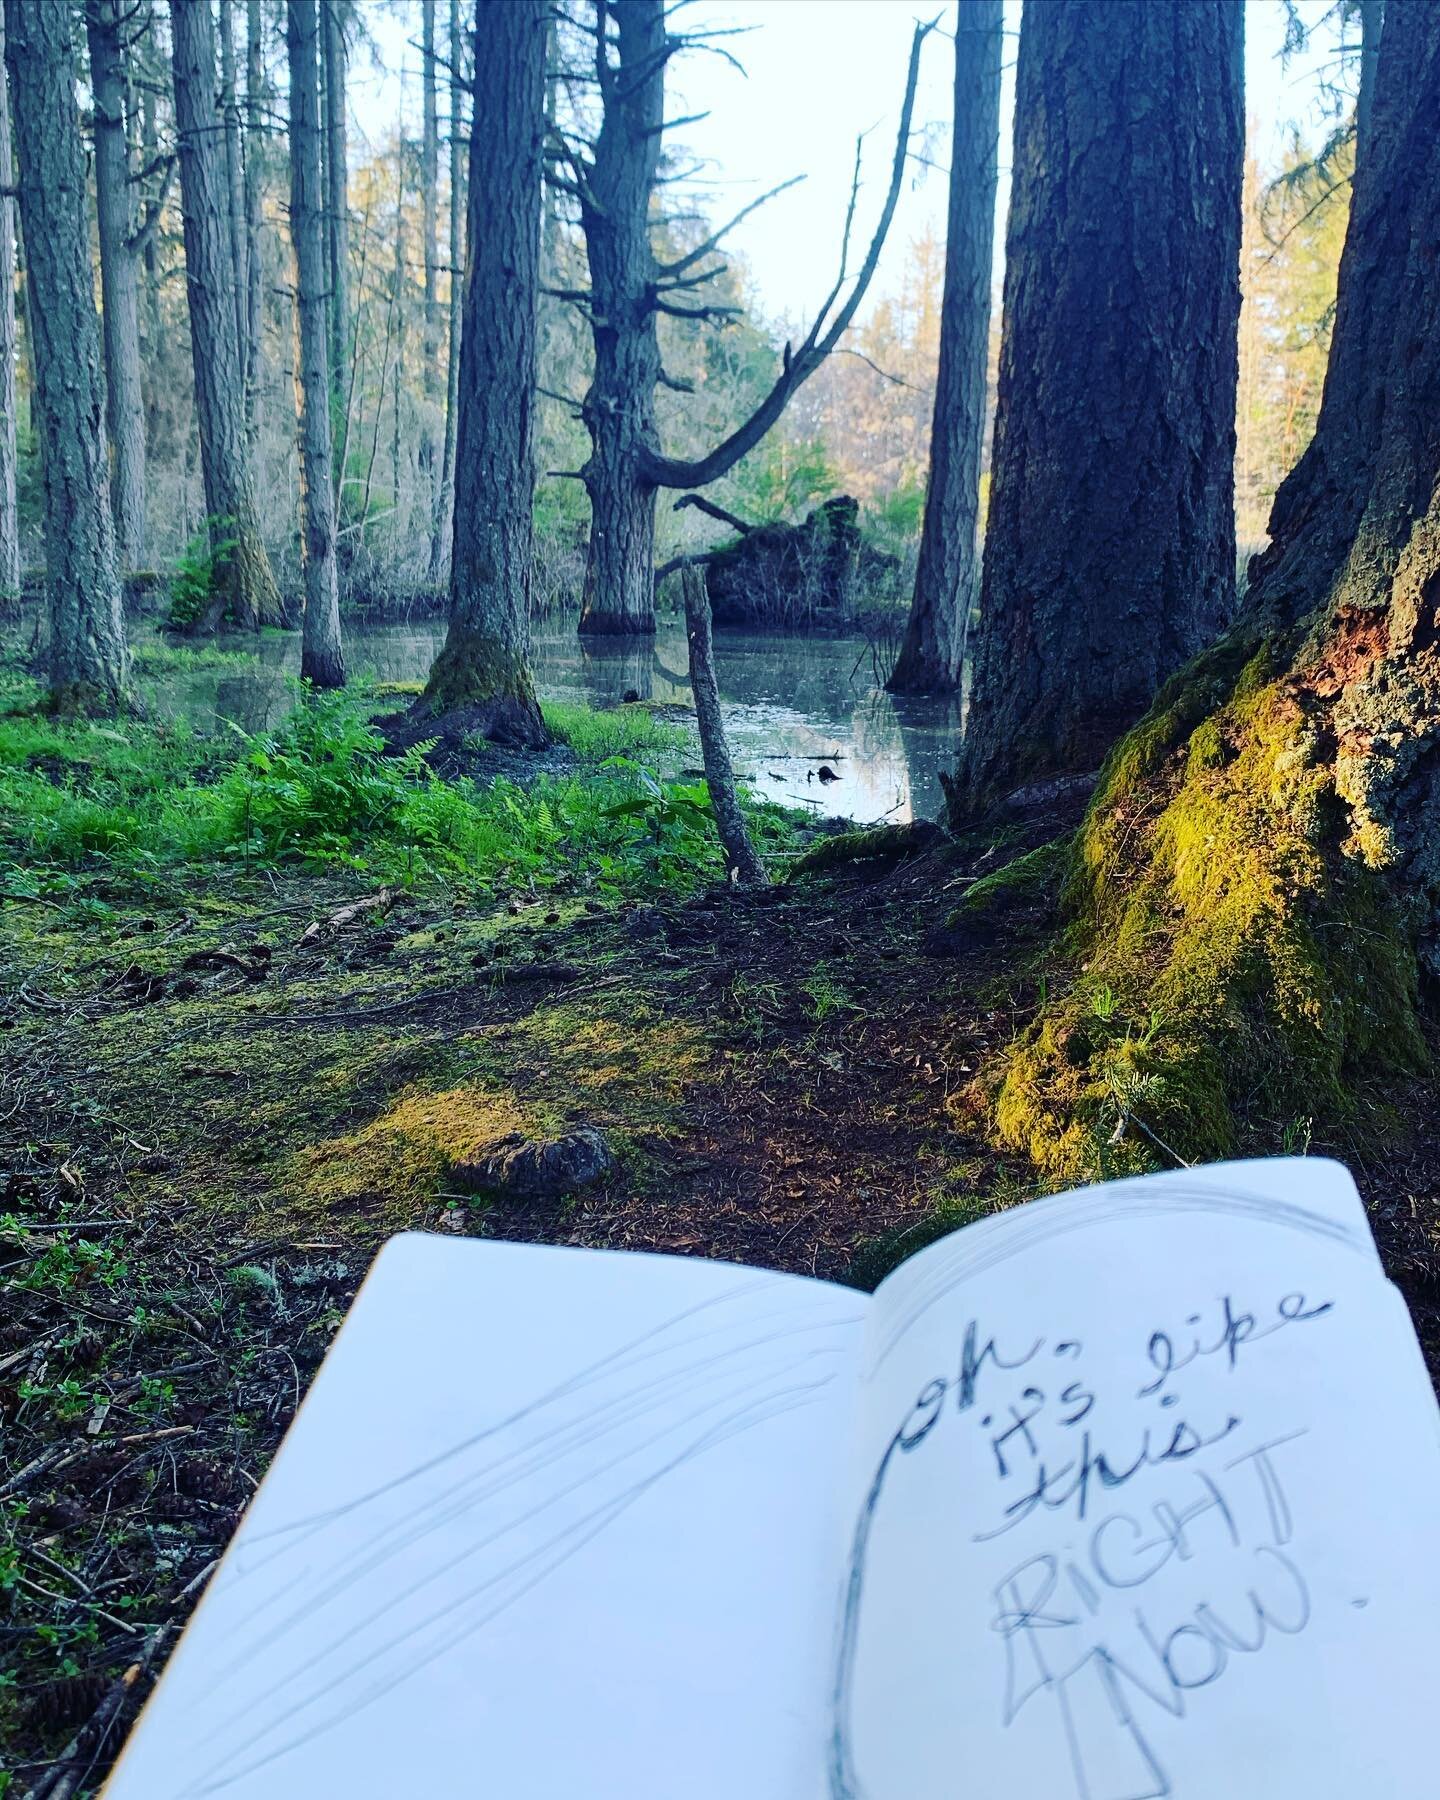 Studied my mindfulness meditation teacher training materials in the woods today to practice walking, standing, sitting and moving with awareness of breath. I haven&rsquo;t quite unlocked how this impacts my vision, but I know that when I&rsquo;m medi